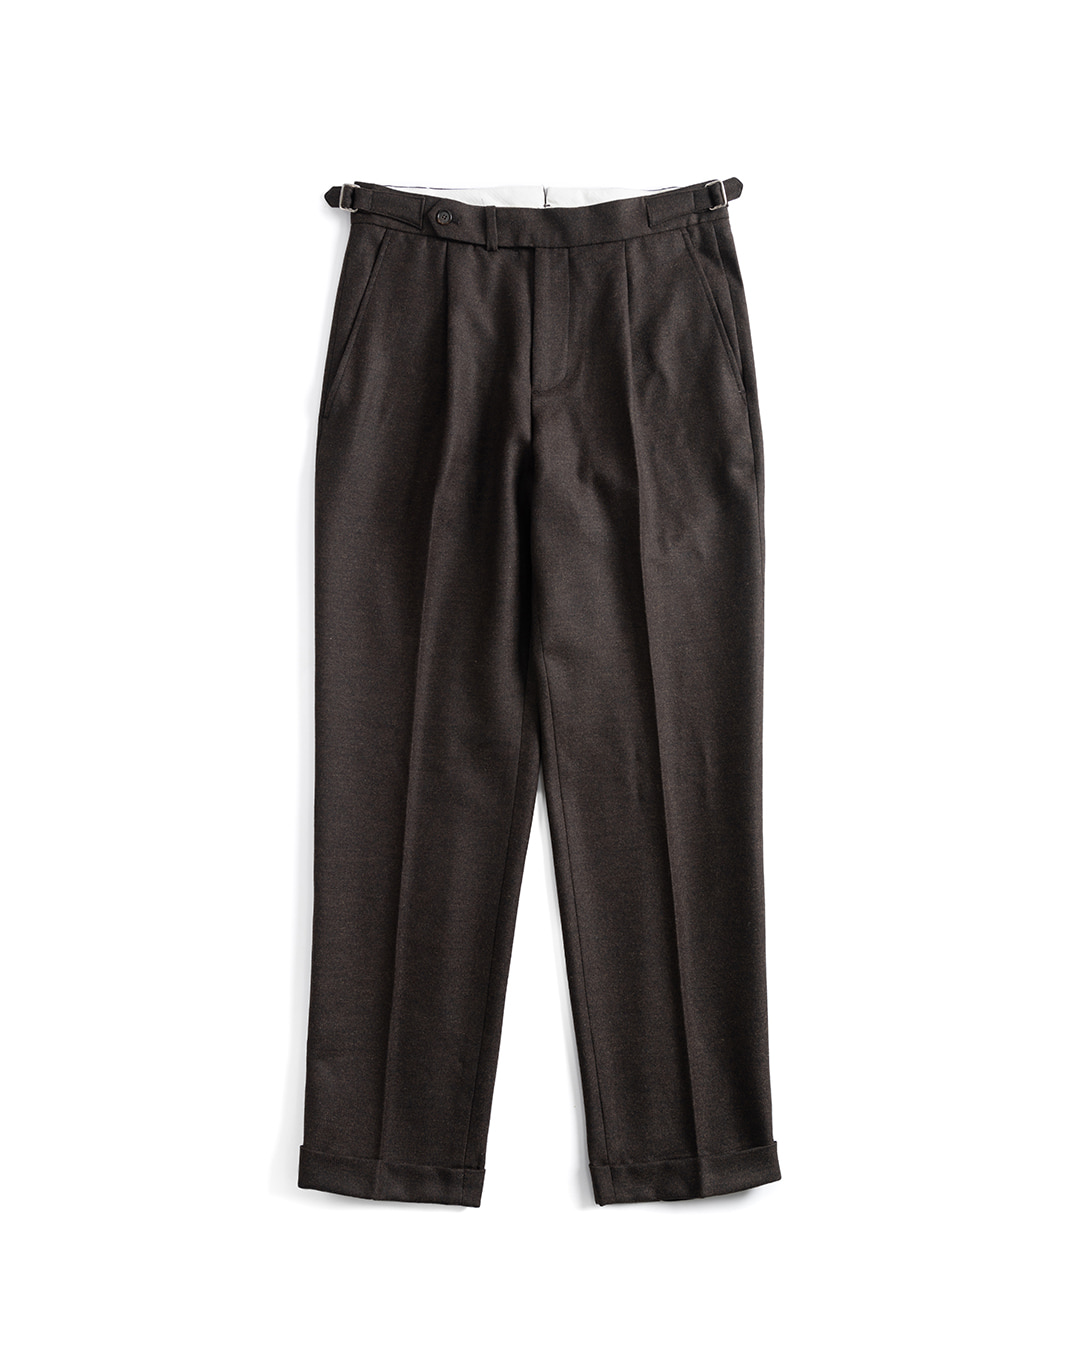 08 TAILORED FIT TROUSERS (dark brown)